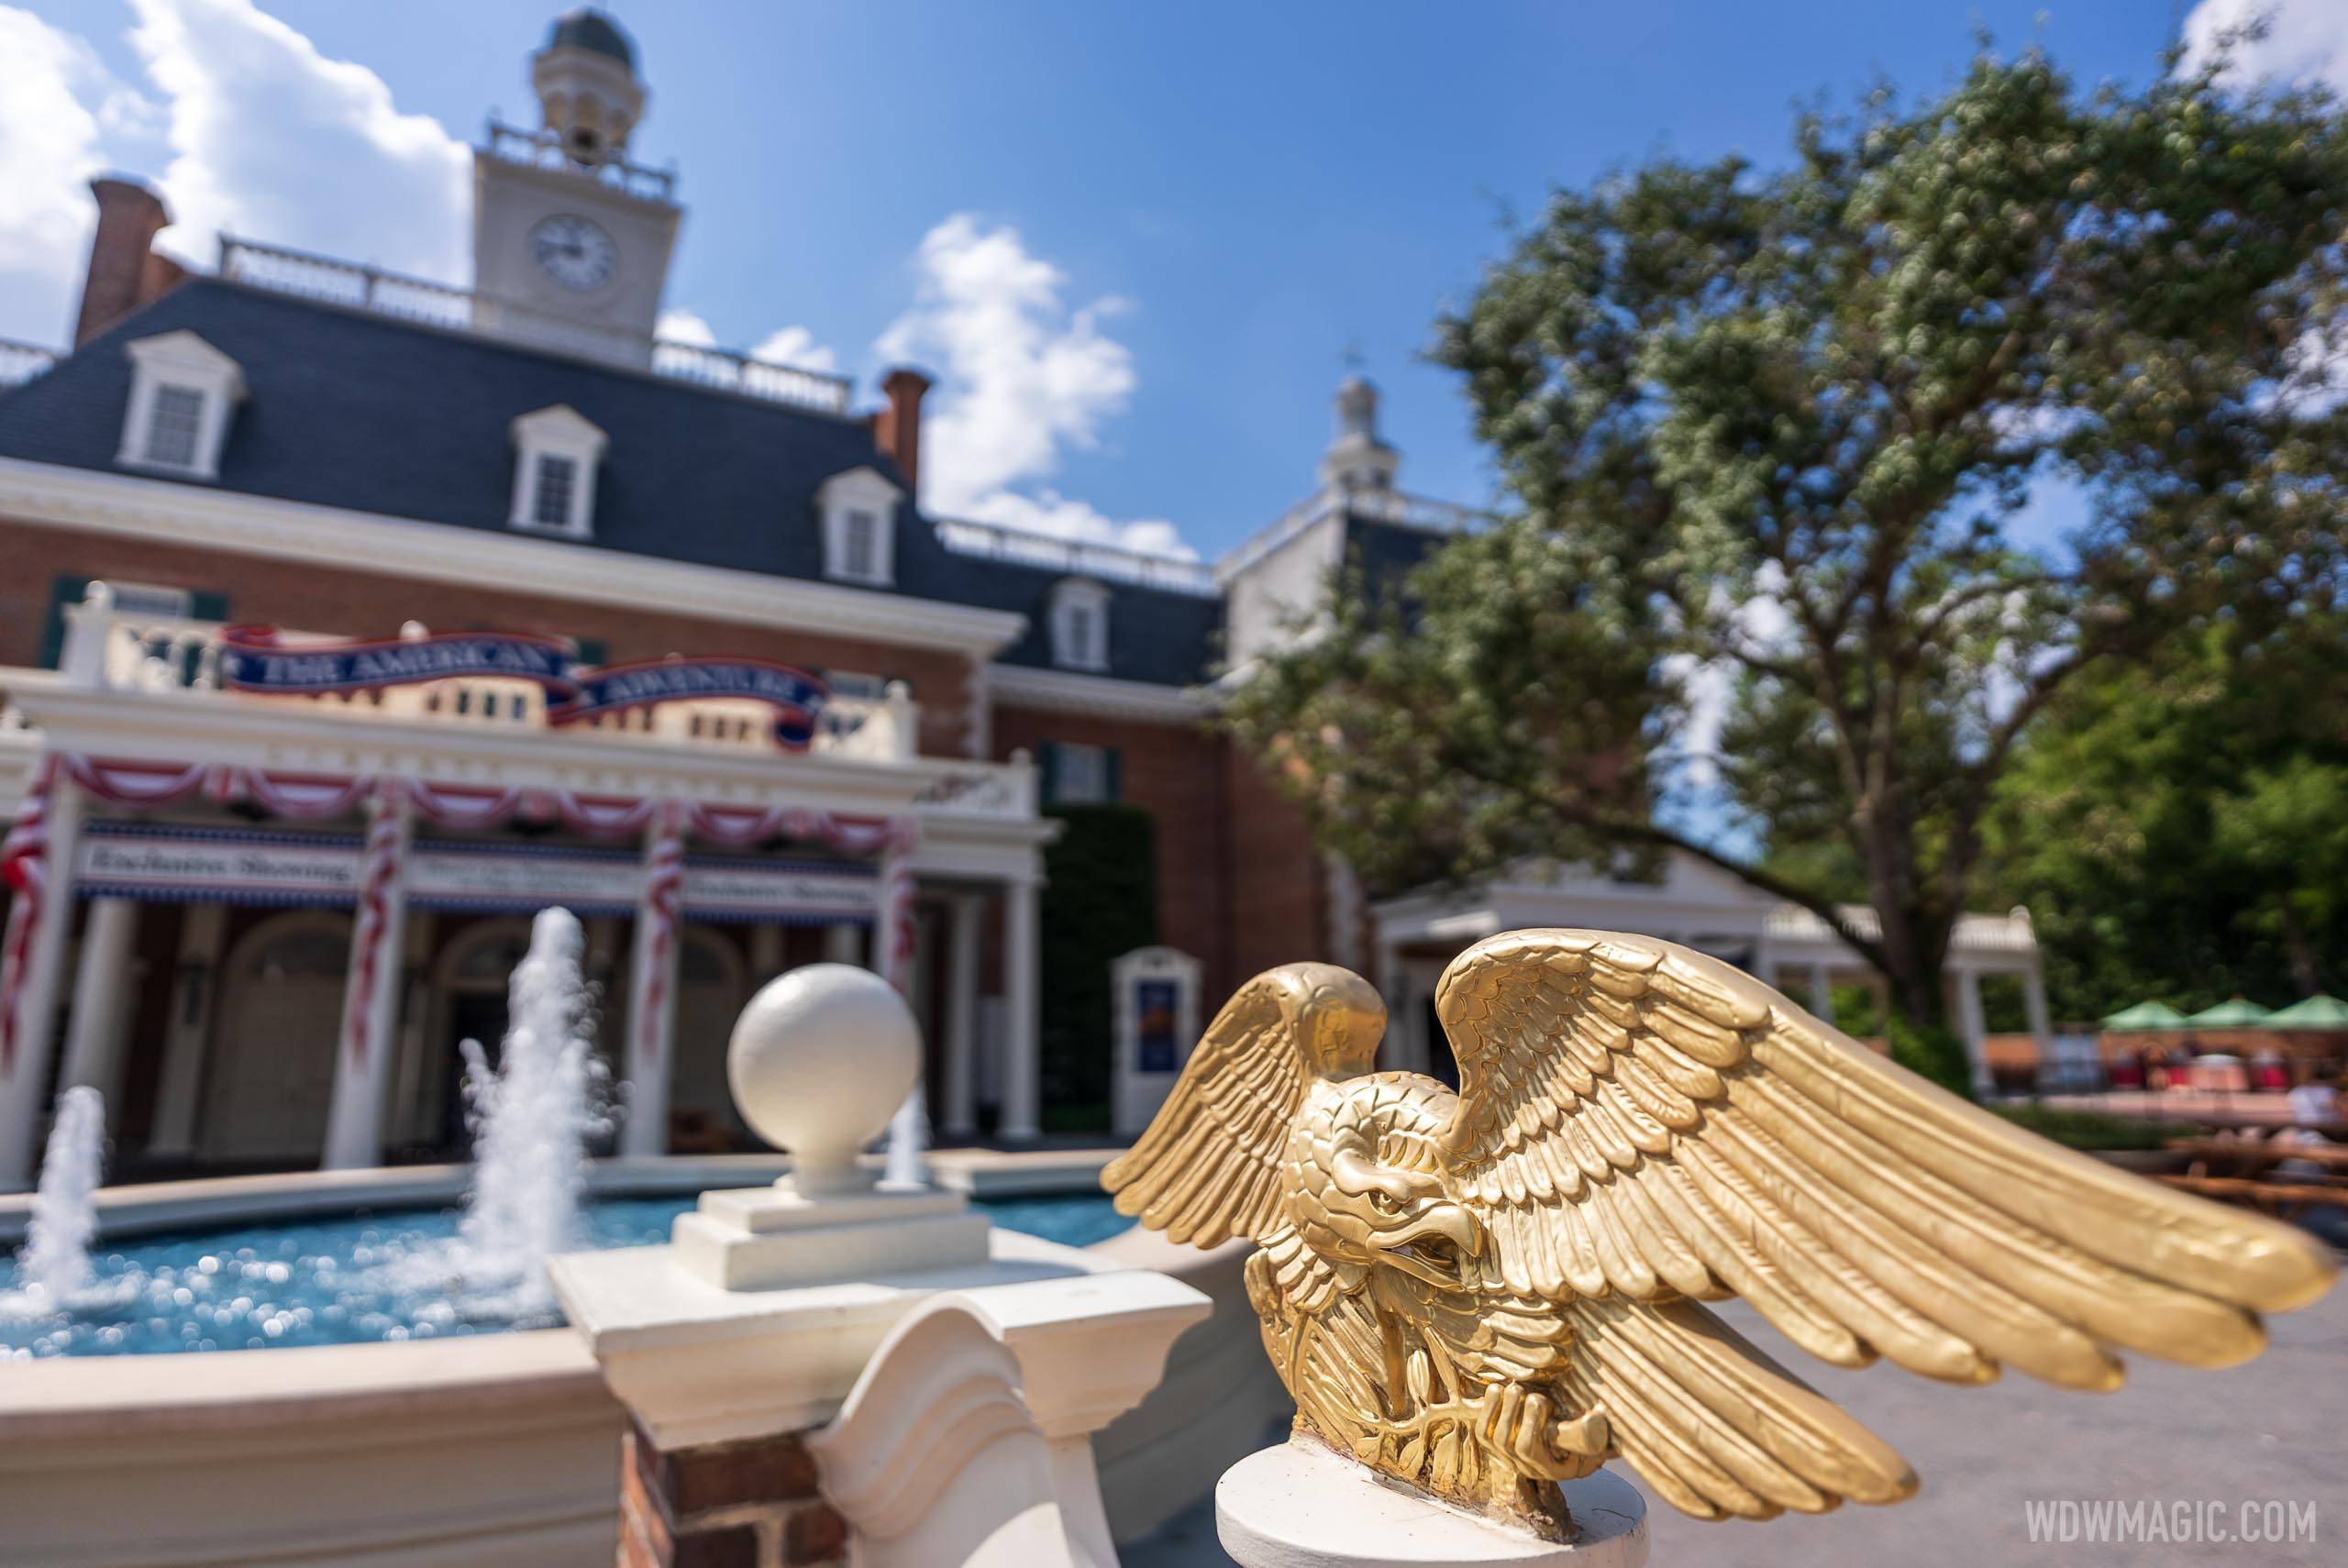 A third reopening date set for The American Adventure at EPCOT